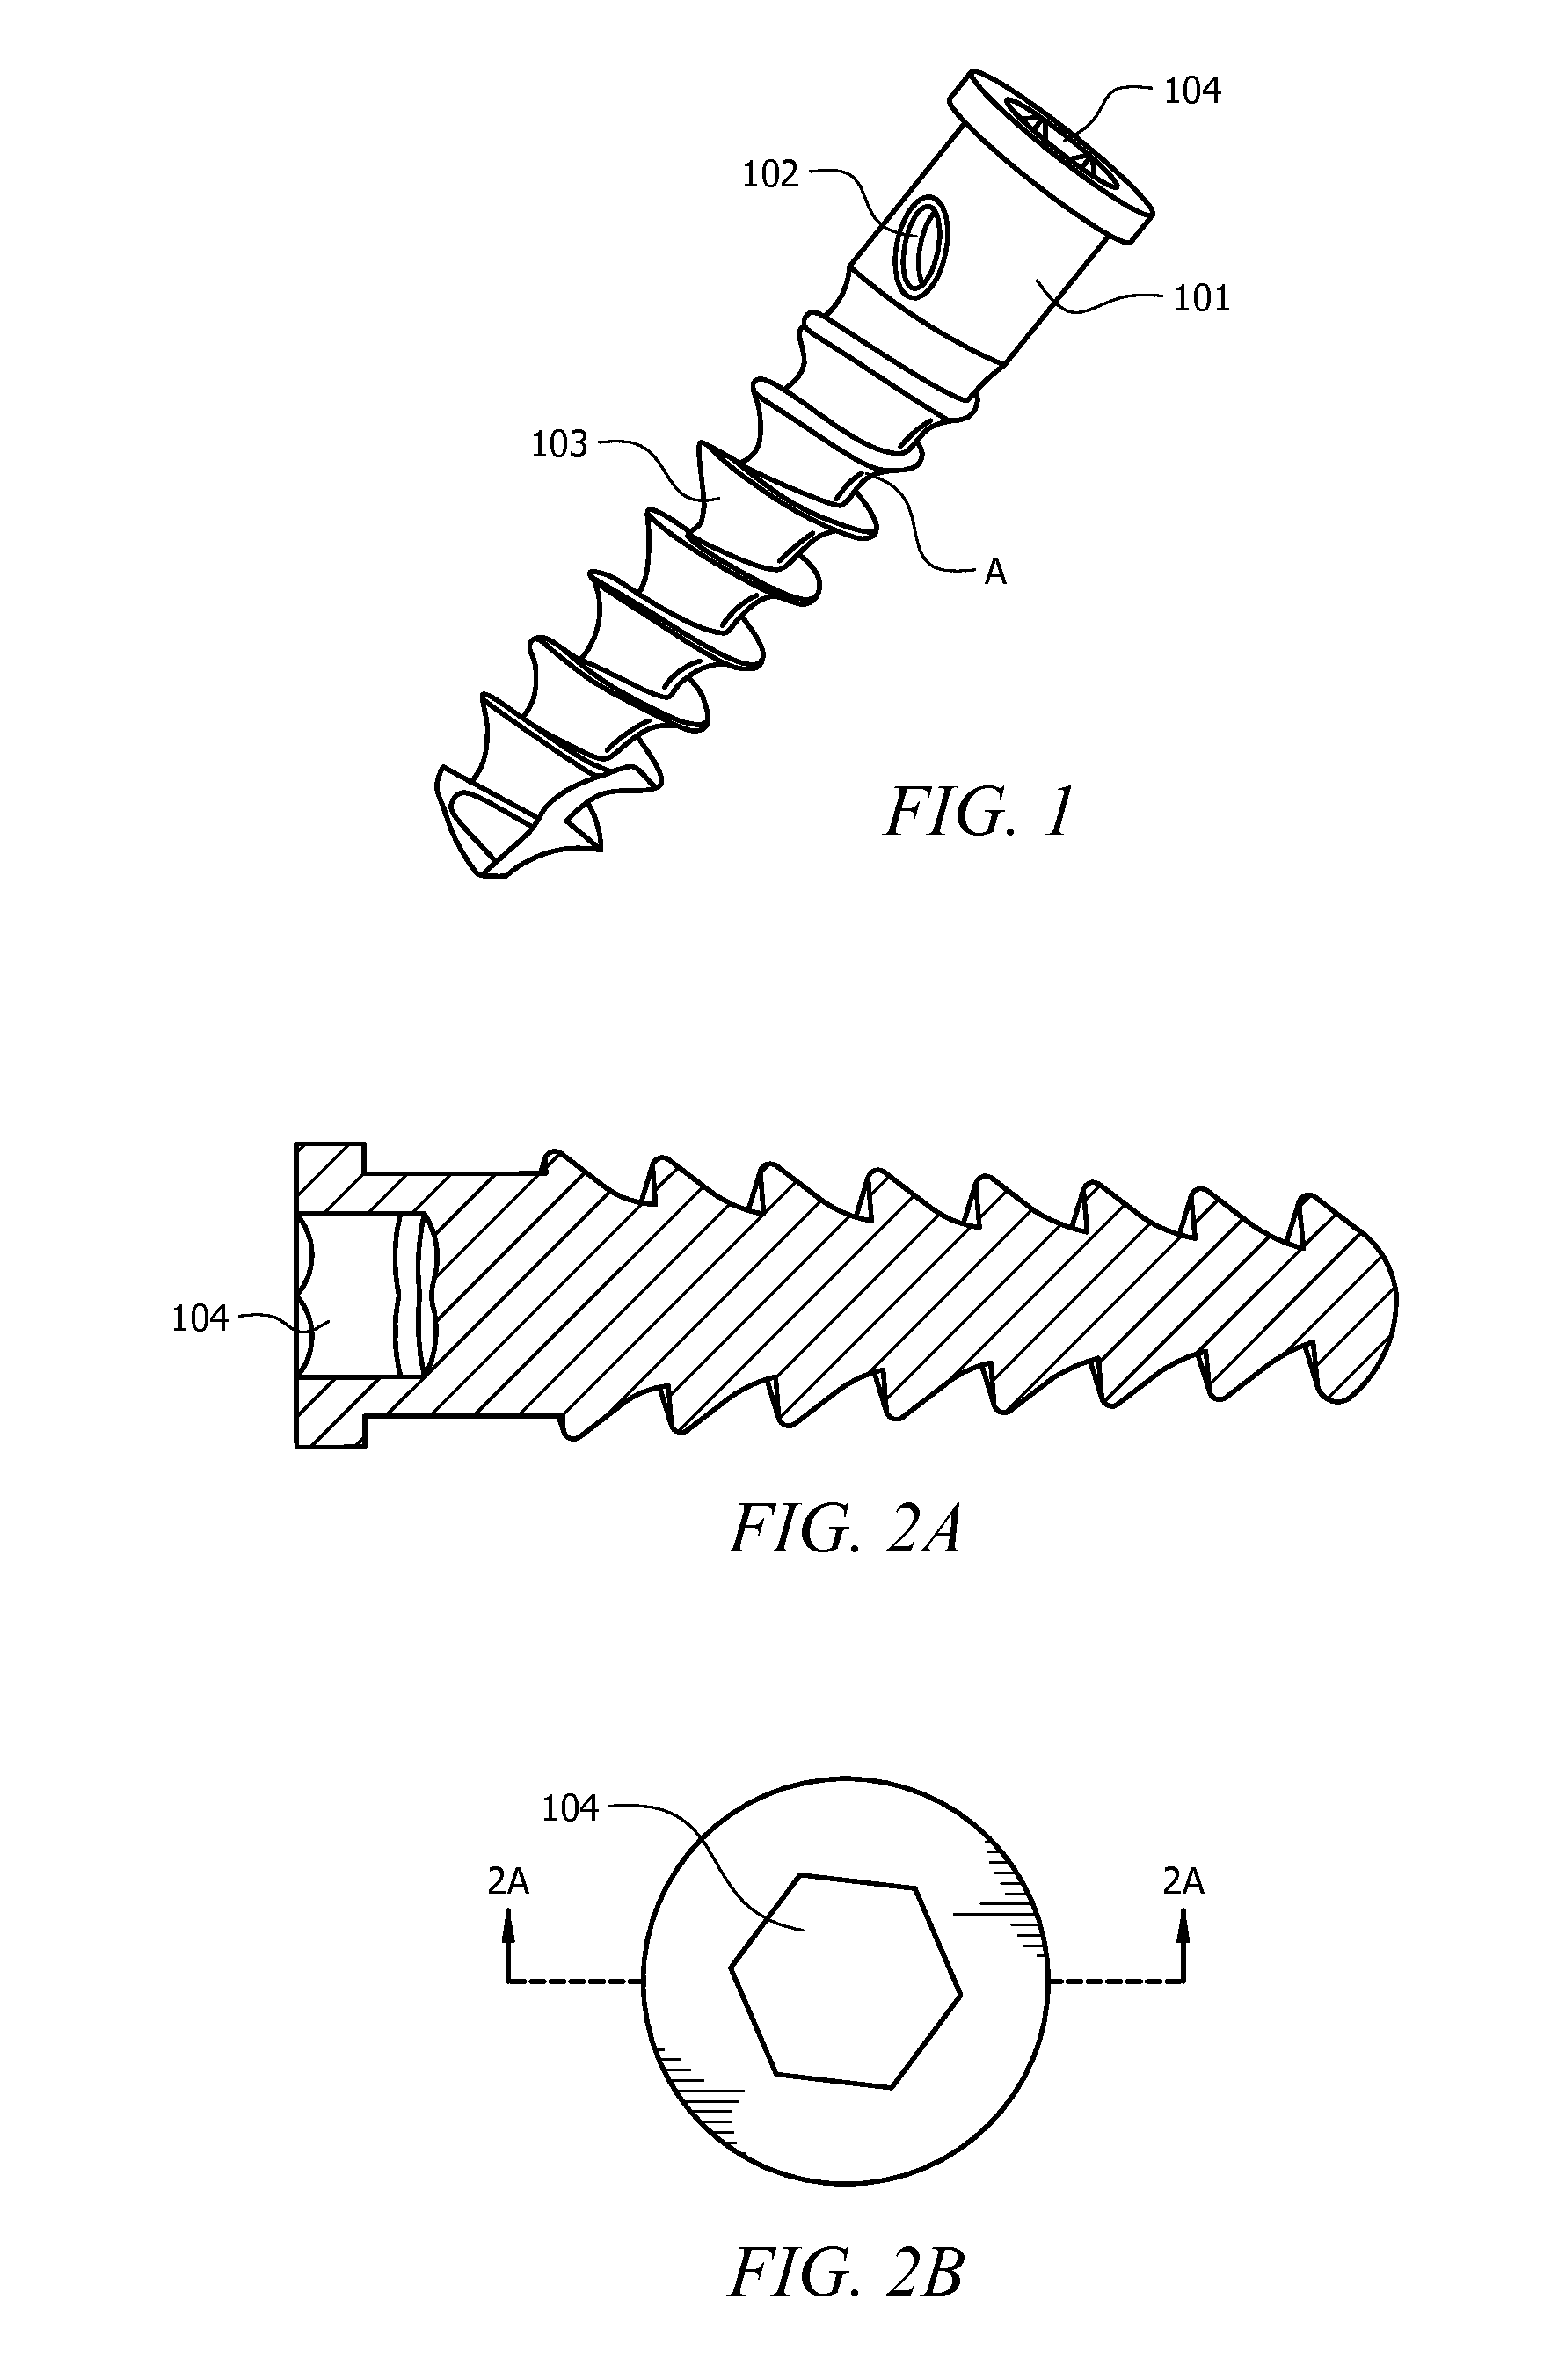 Universal anchor for attaching objects to bone tissue